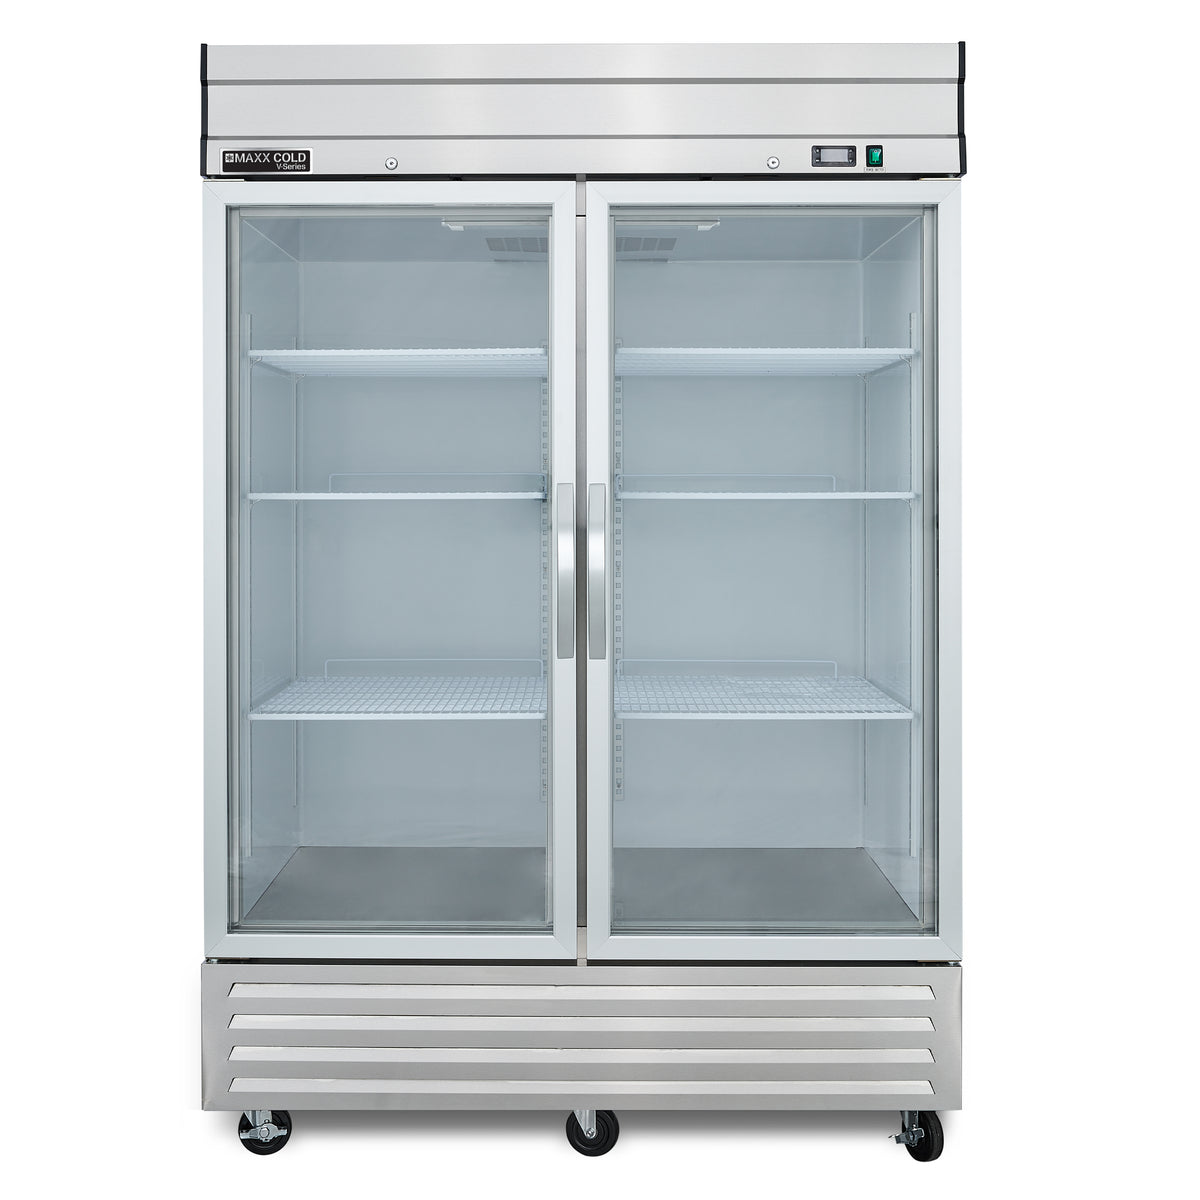 Maxx Cold MVR-49GD V-Series 2 Glass Door Reach-In Refrigerator, Bottom Mount, 54"W, 42 cu. ft. Storage Capacity, in Stainless Steel (MVR-49GDHC)